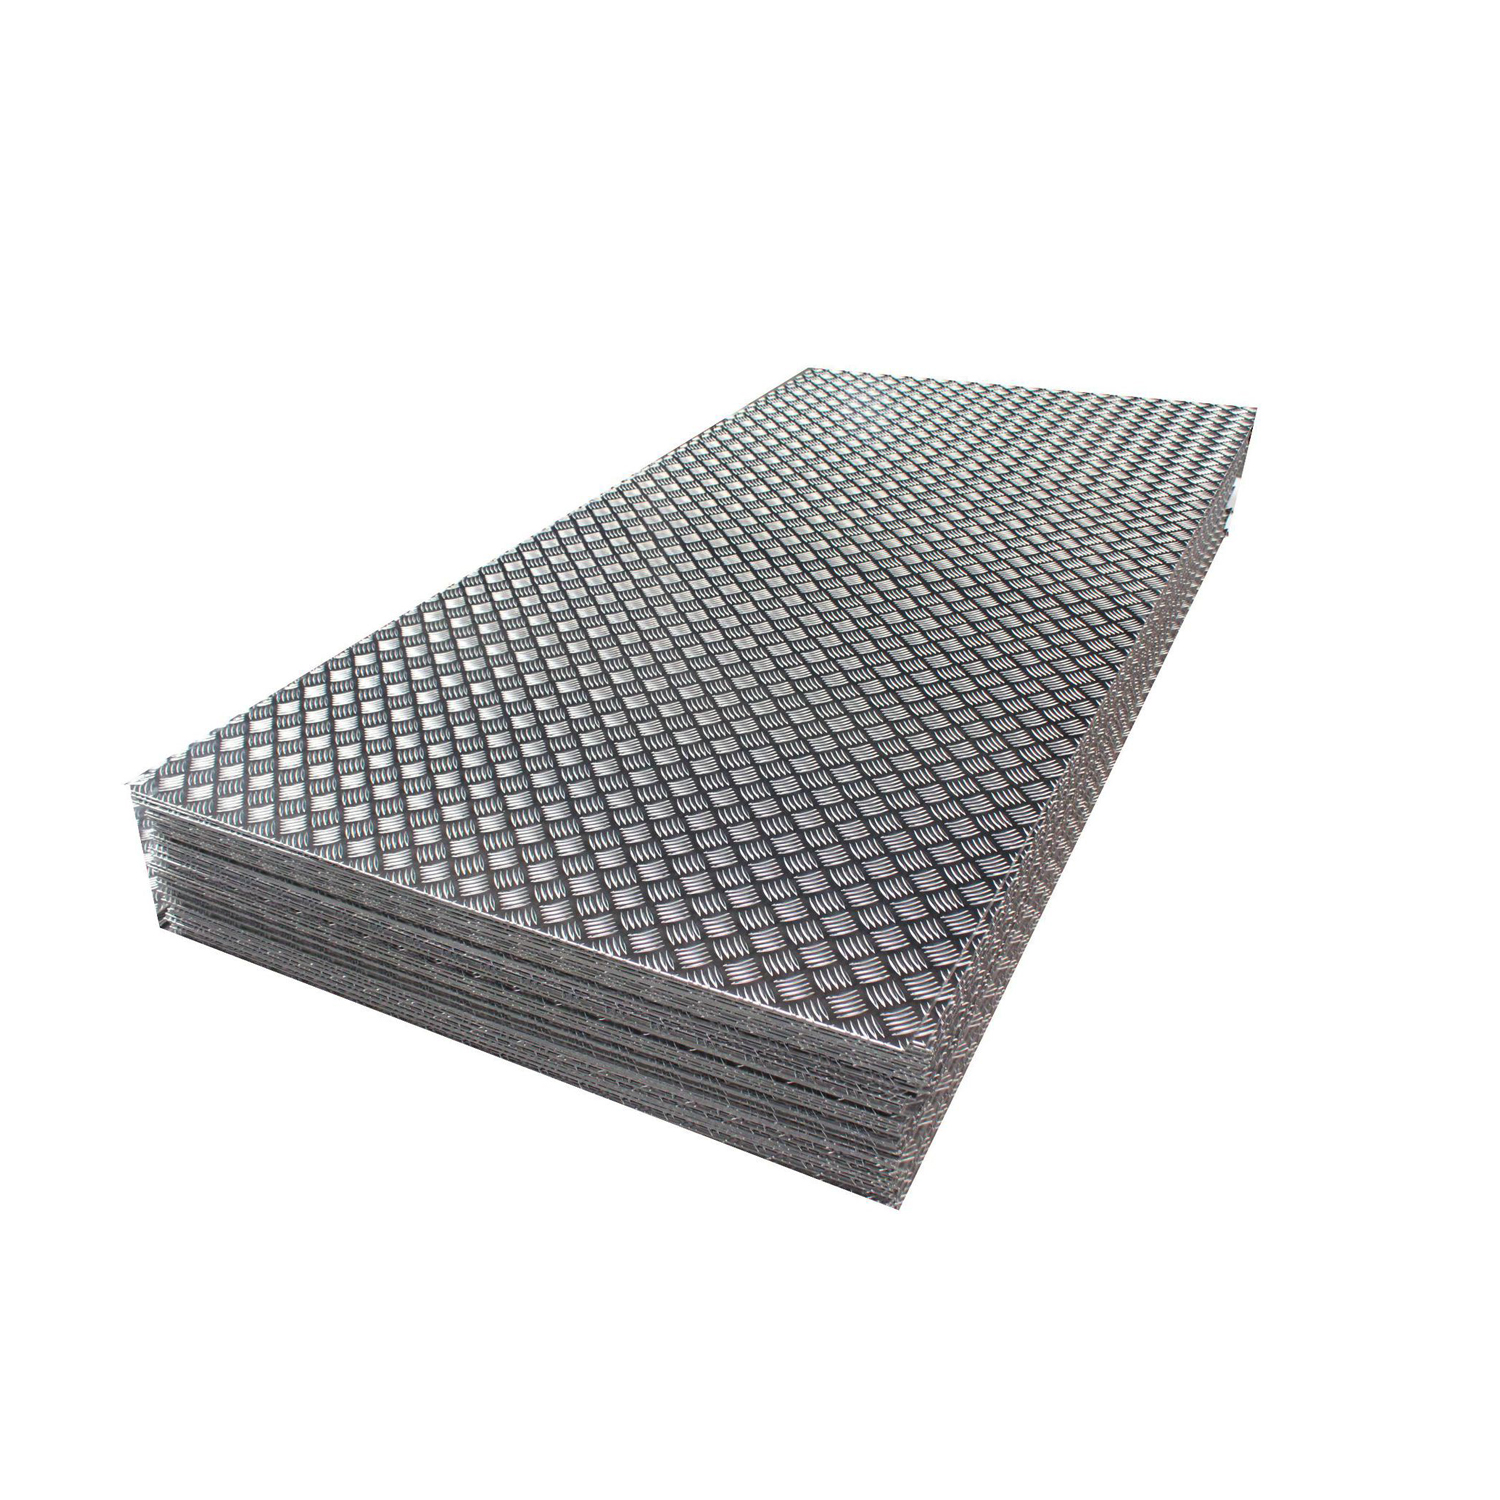 1mm To 10mm Diamond Pattern Anti-Skid 304 316 316l Chequered Stainless Steel Floor Sheet/Plate Price 